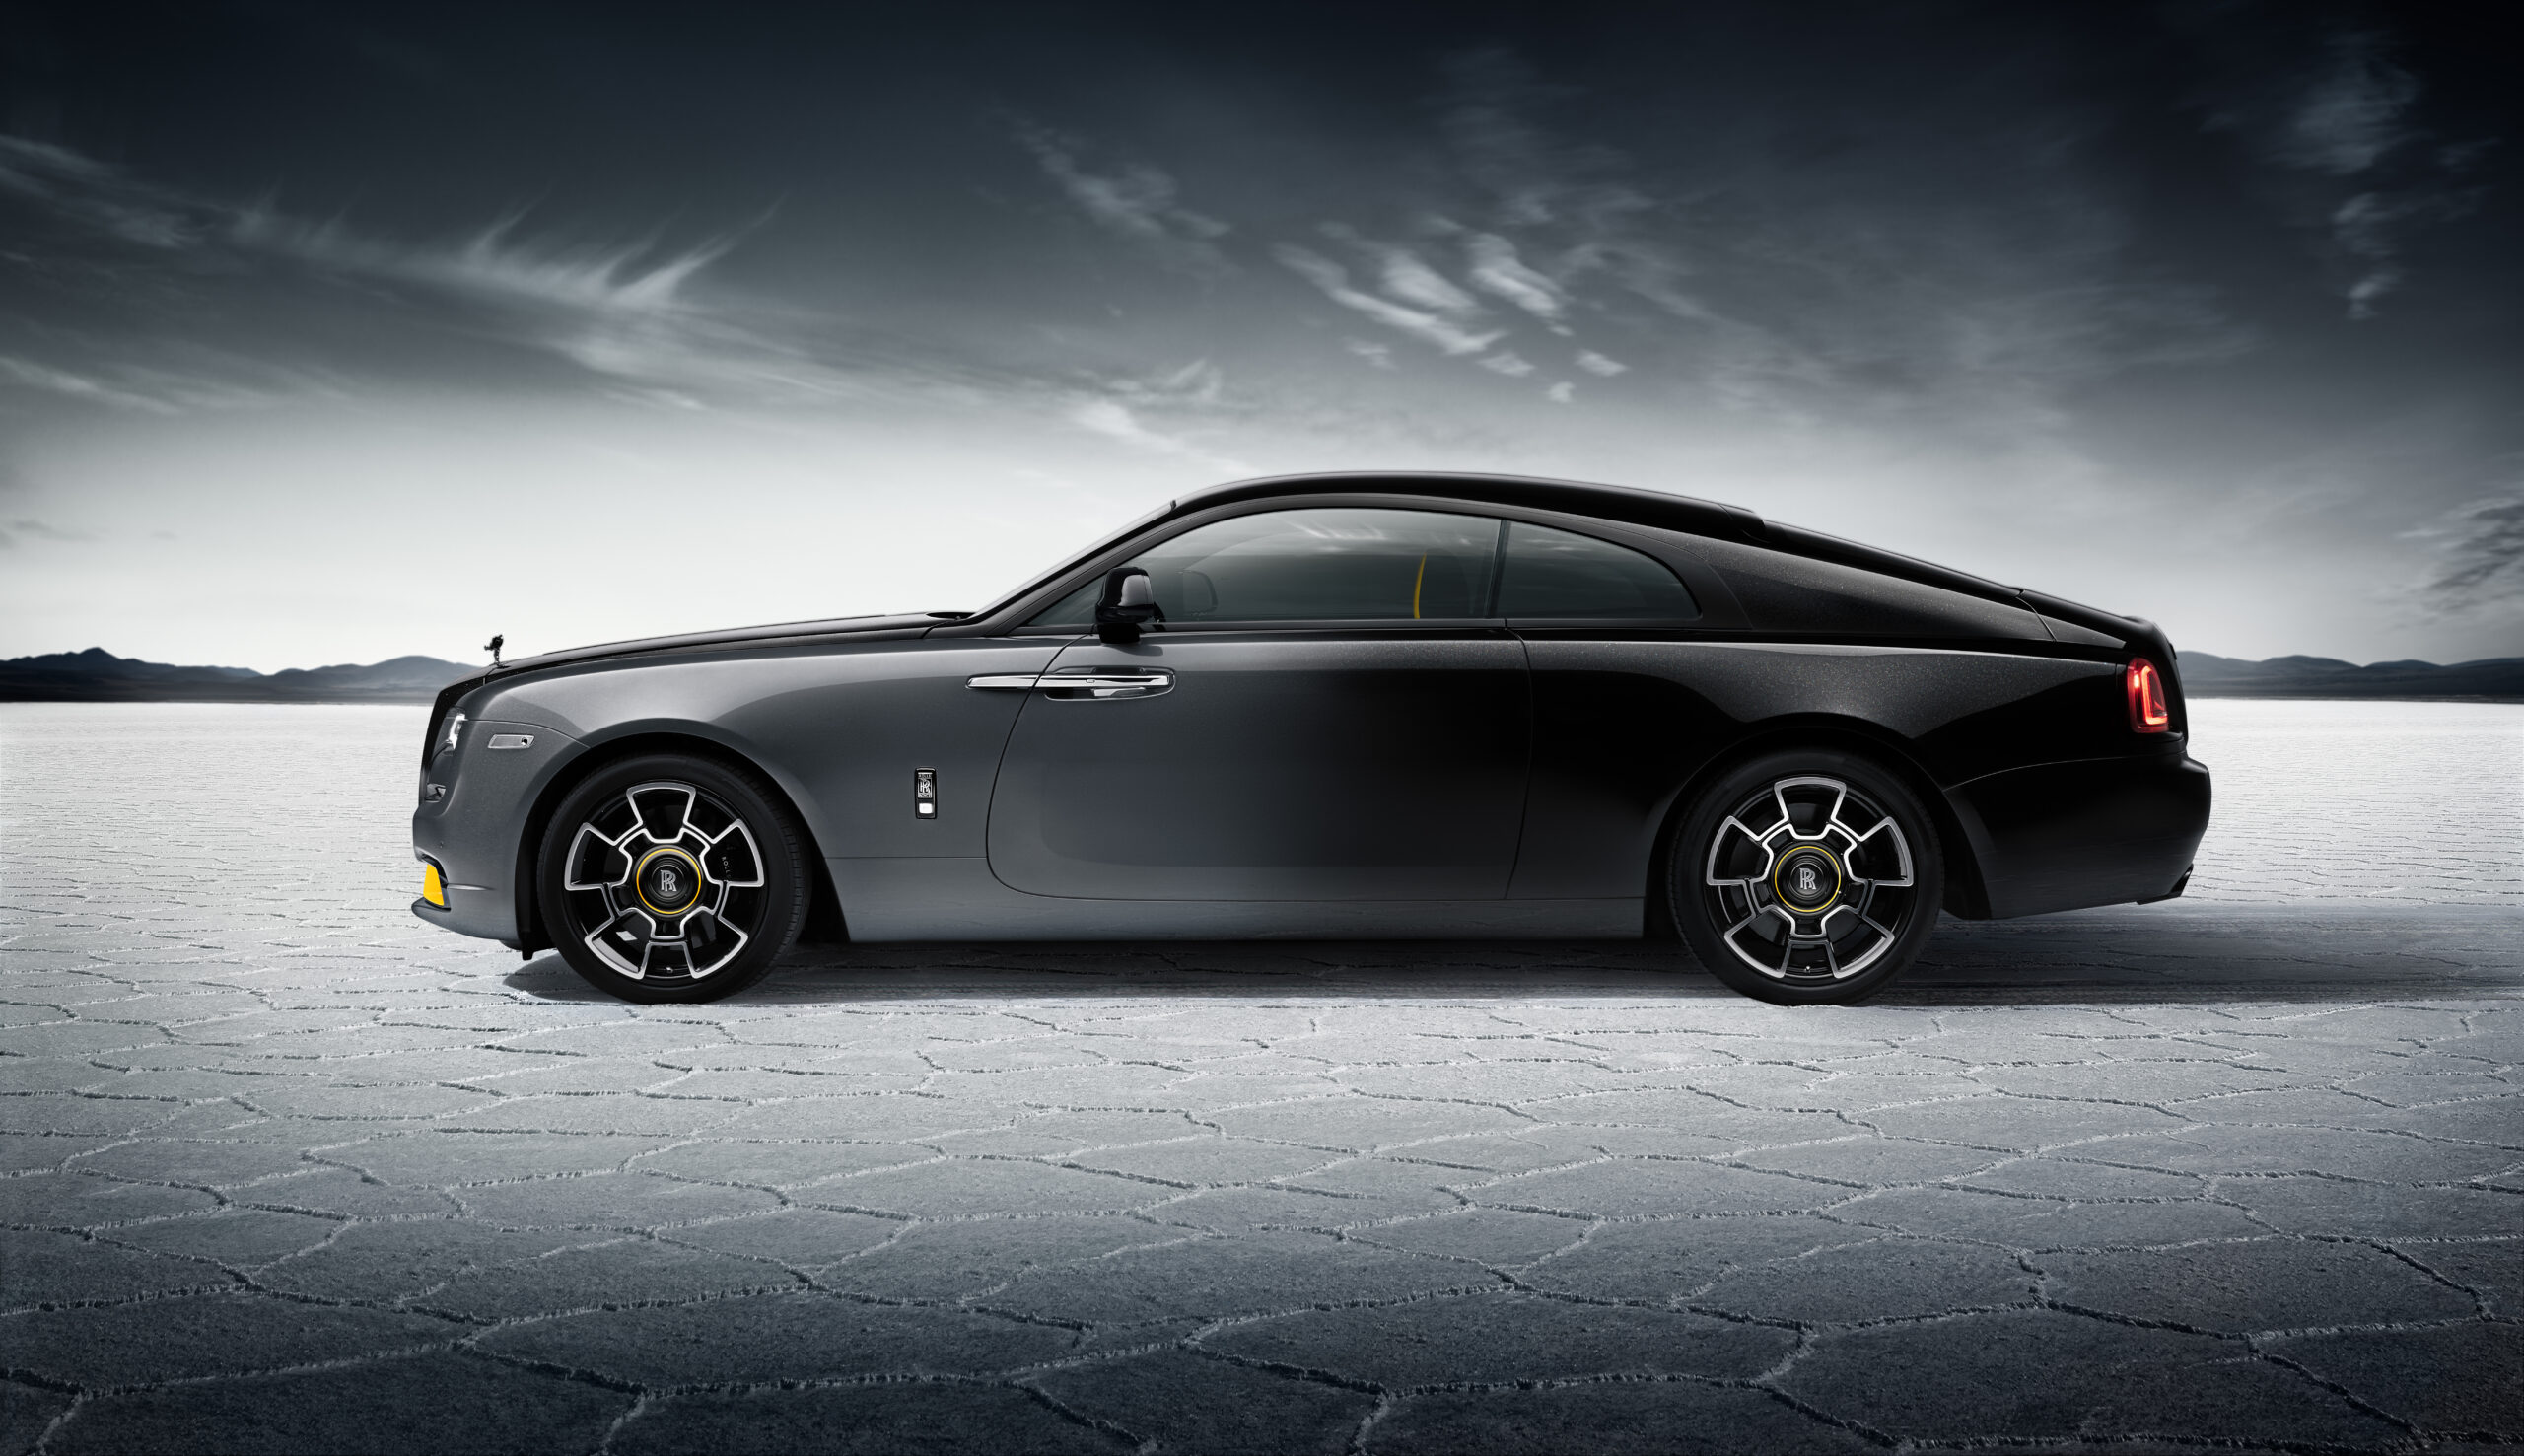 Rolls-Royce Black Badge Wraith Black Arrow:  The Grand Finale Of The V12 Coupe From Goodwood